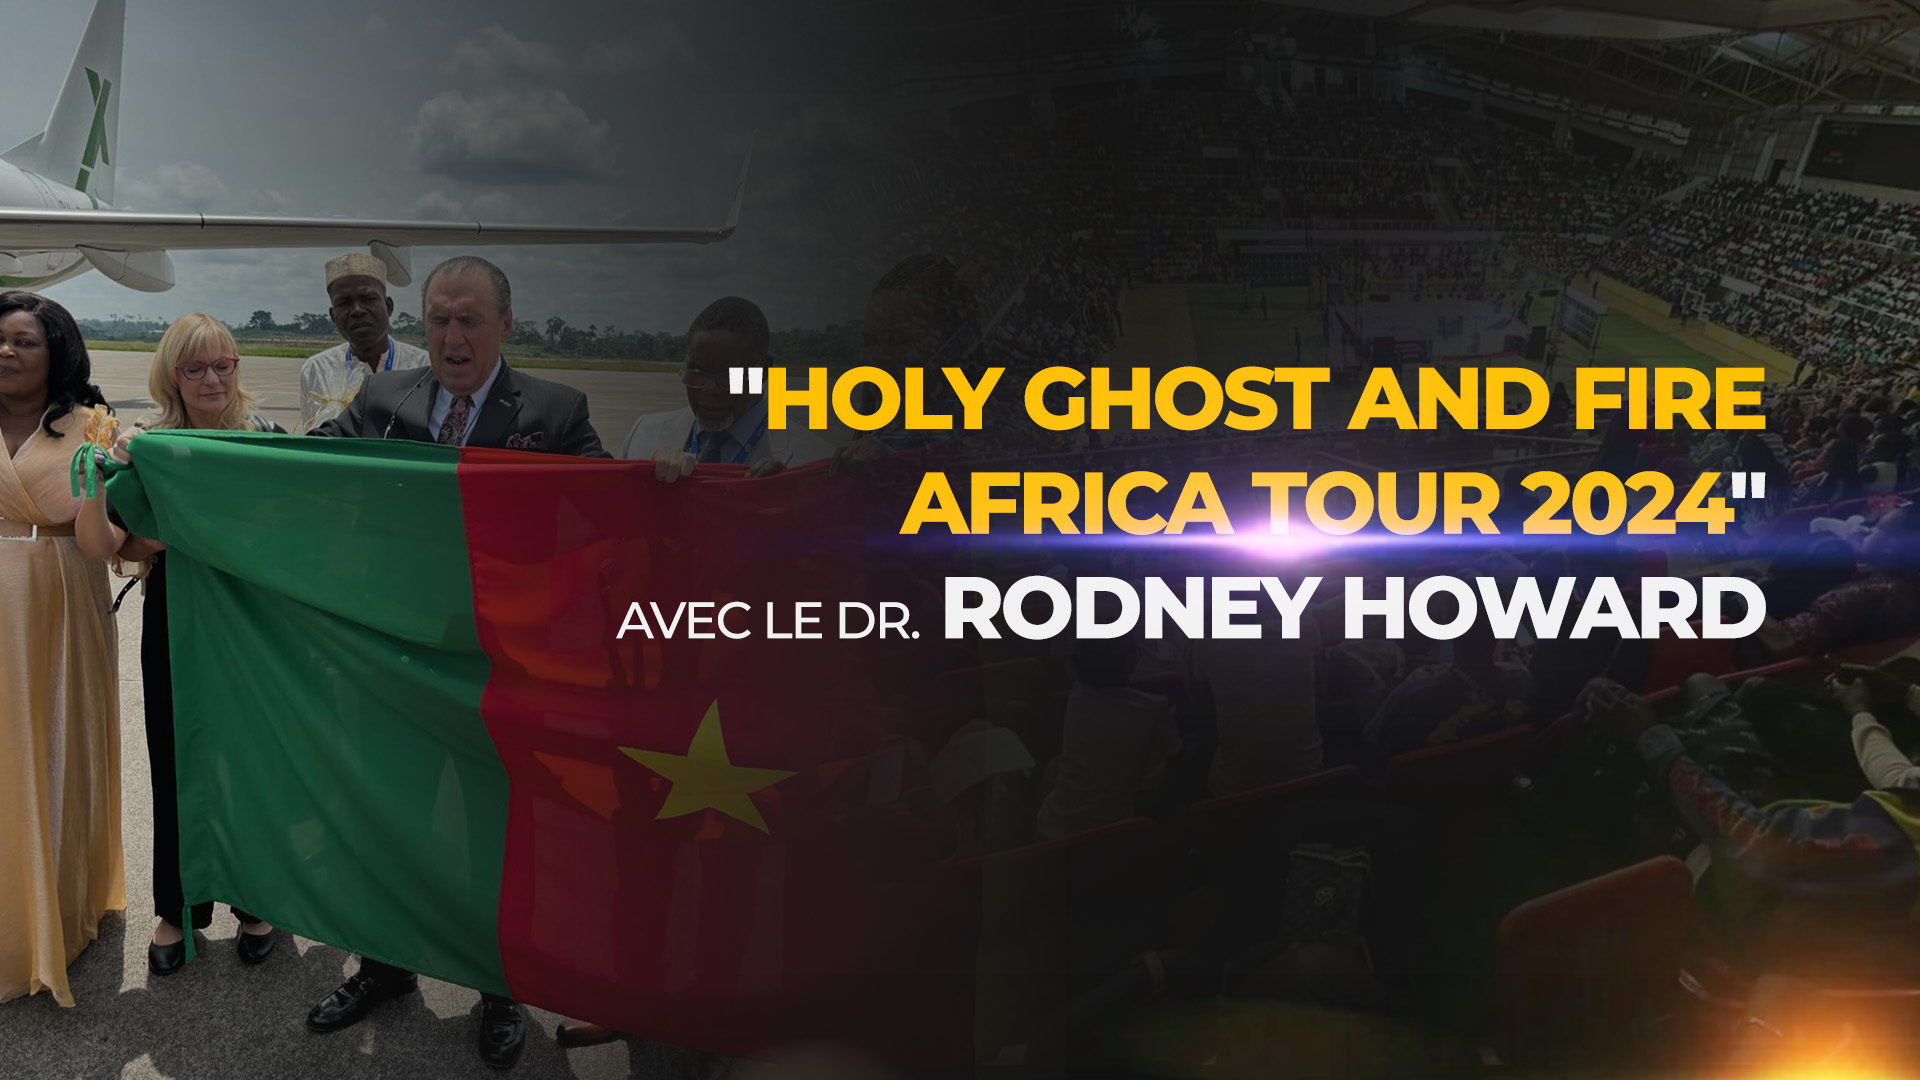 Holy Ghost and Fire Africa Tour 2024 avec le Dr. Rodney Howard 